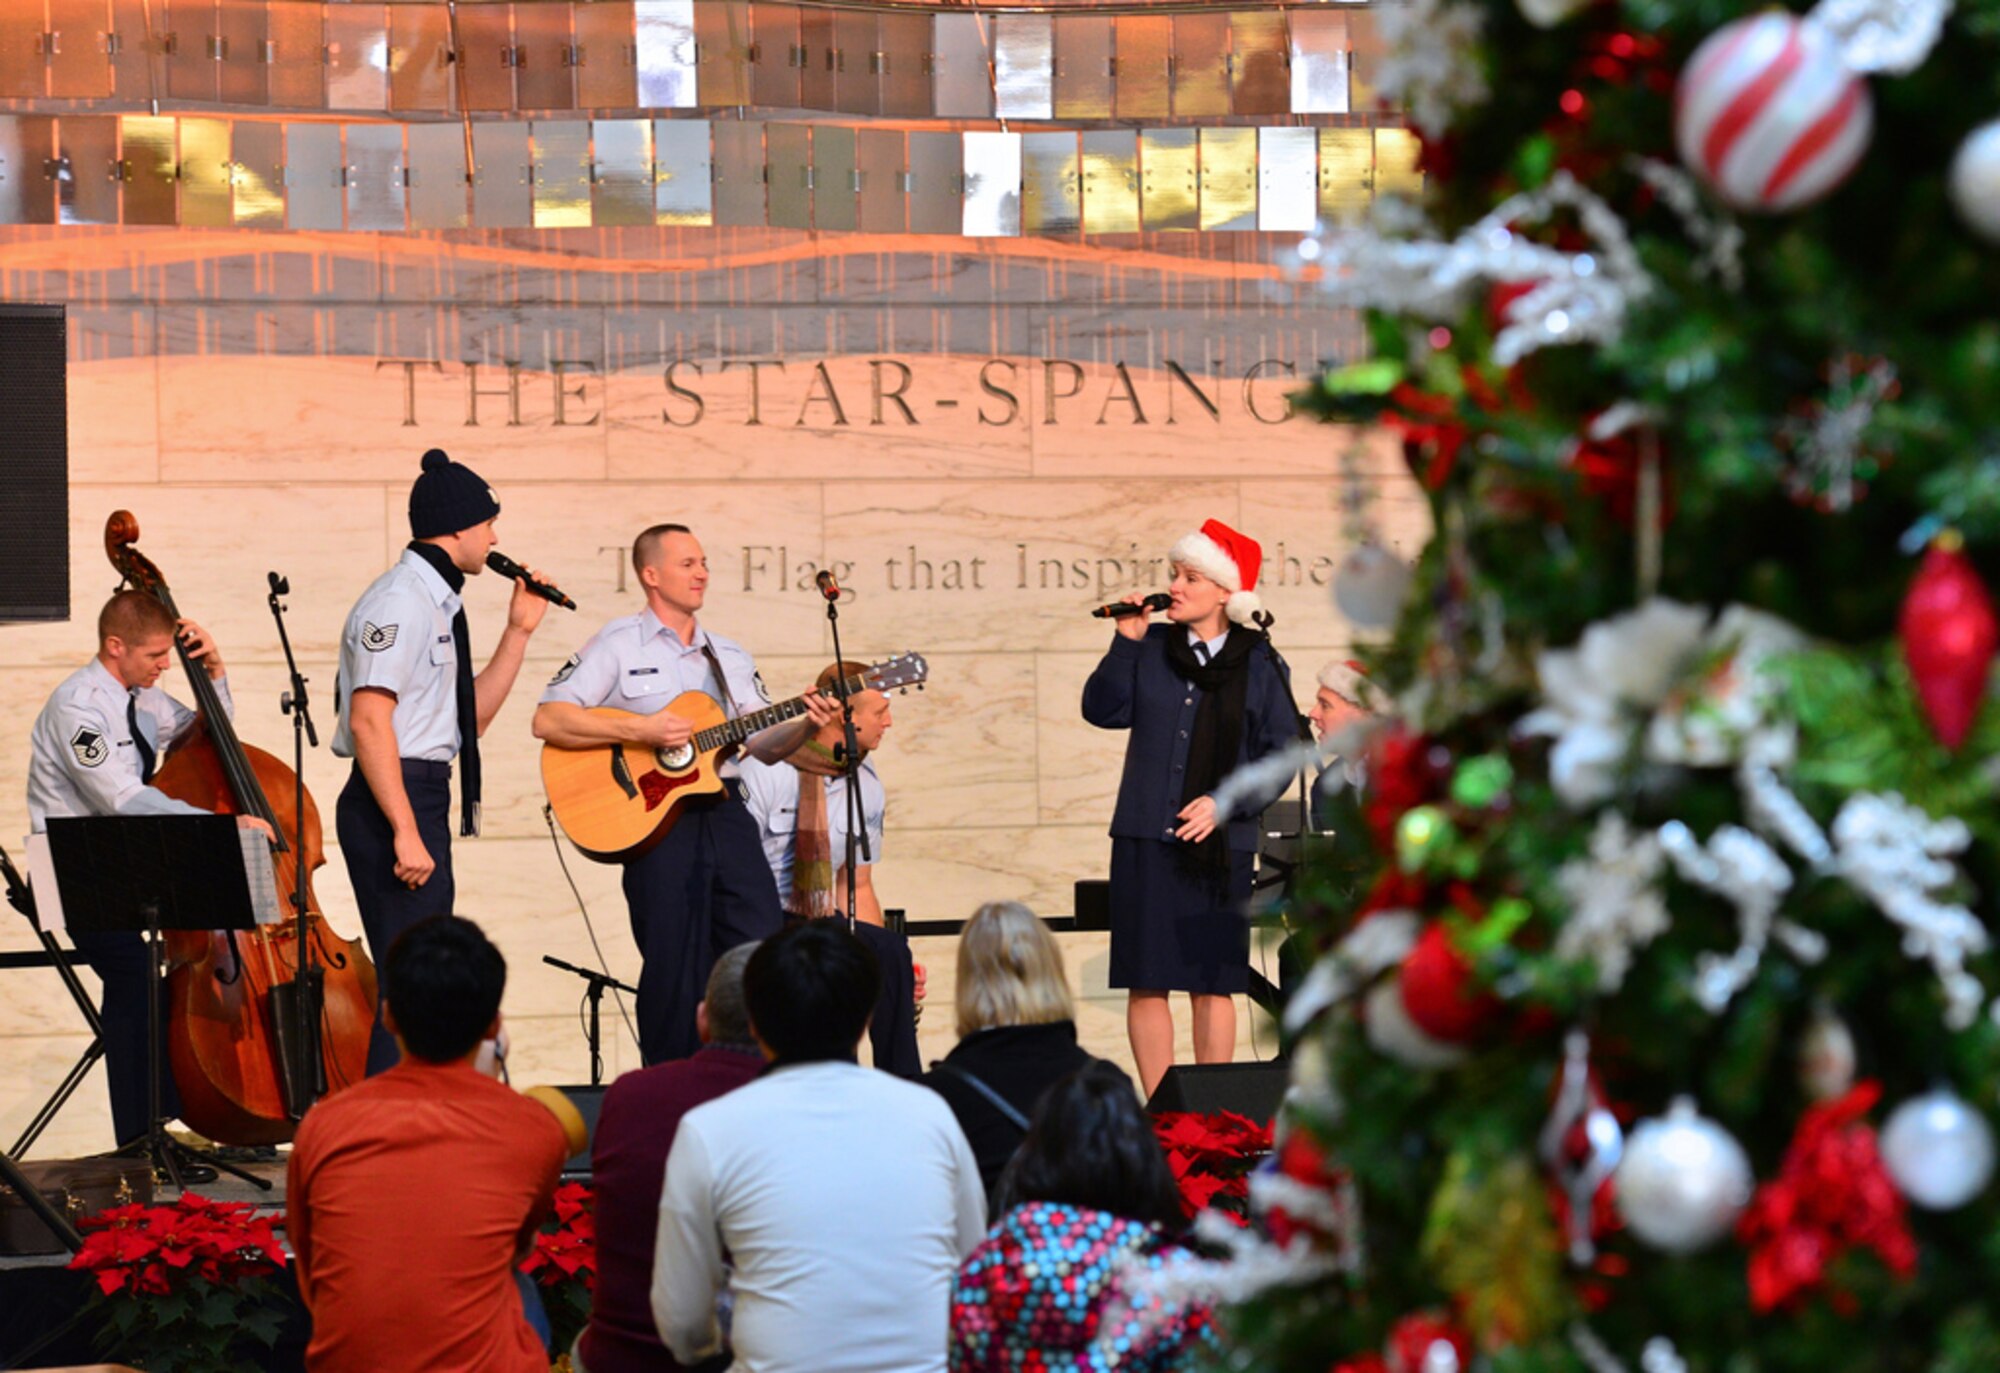 Silver Wings will once again perform for guests at the Smithsonian's
National Museum of American History, on Saturday, Dec. 6 and Sunday, Dec. 7,
at 12:30 p.m., 1:30 p.m. and 2:30 p.m. (U.S. Air Force photo by Senior
Master Sgt. Kevin Burns/released)